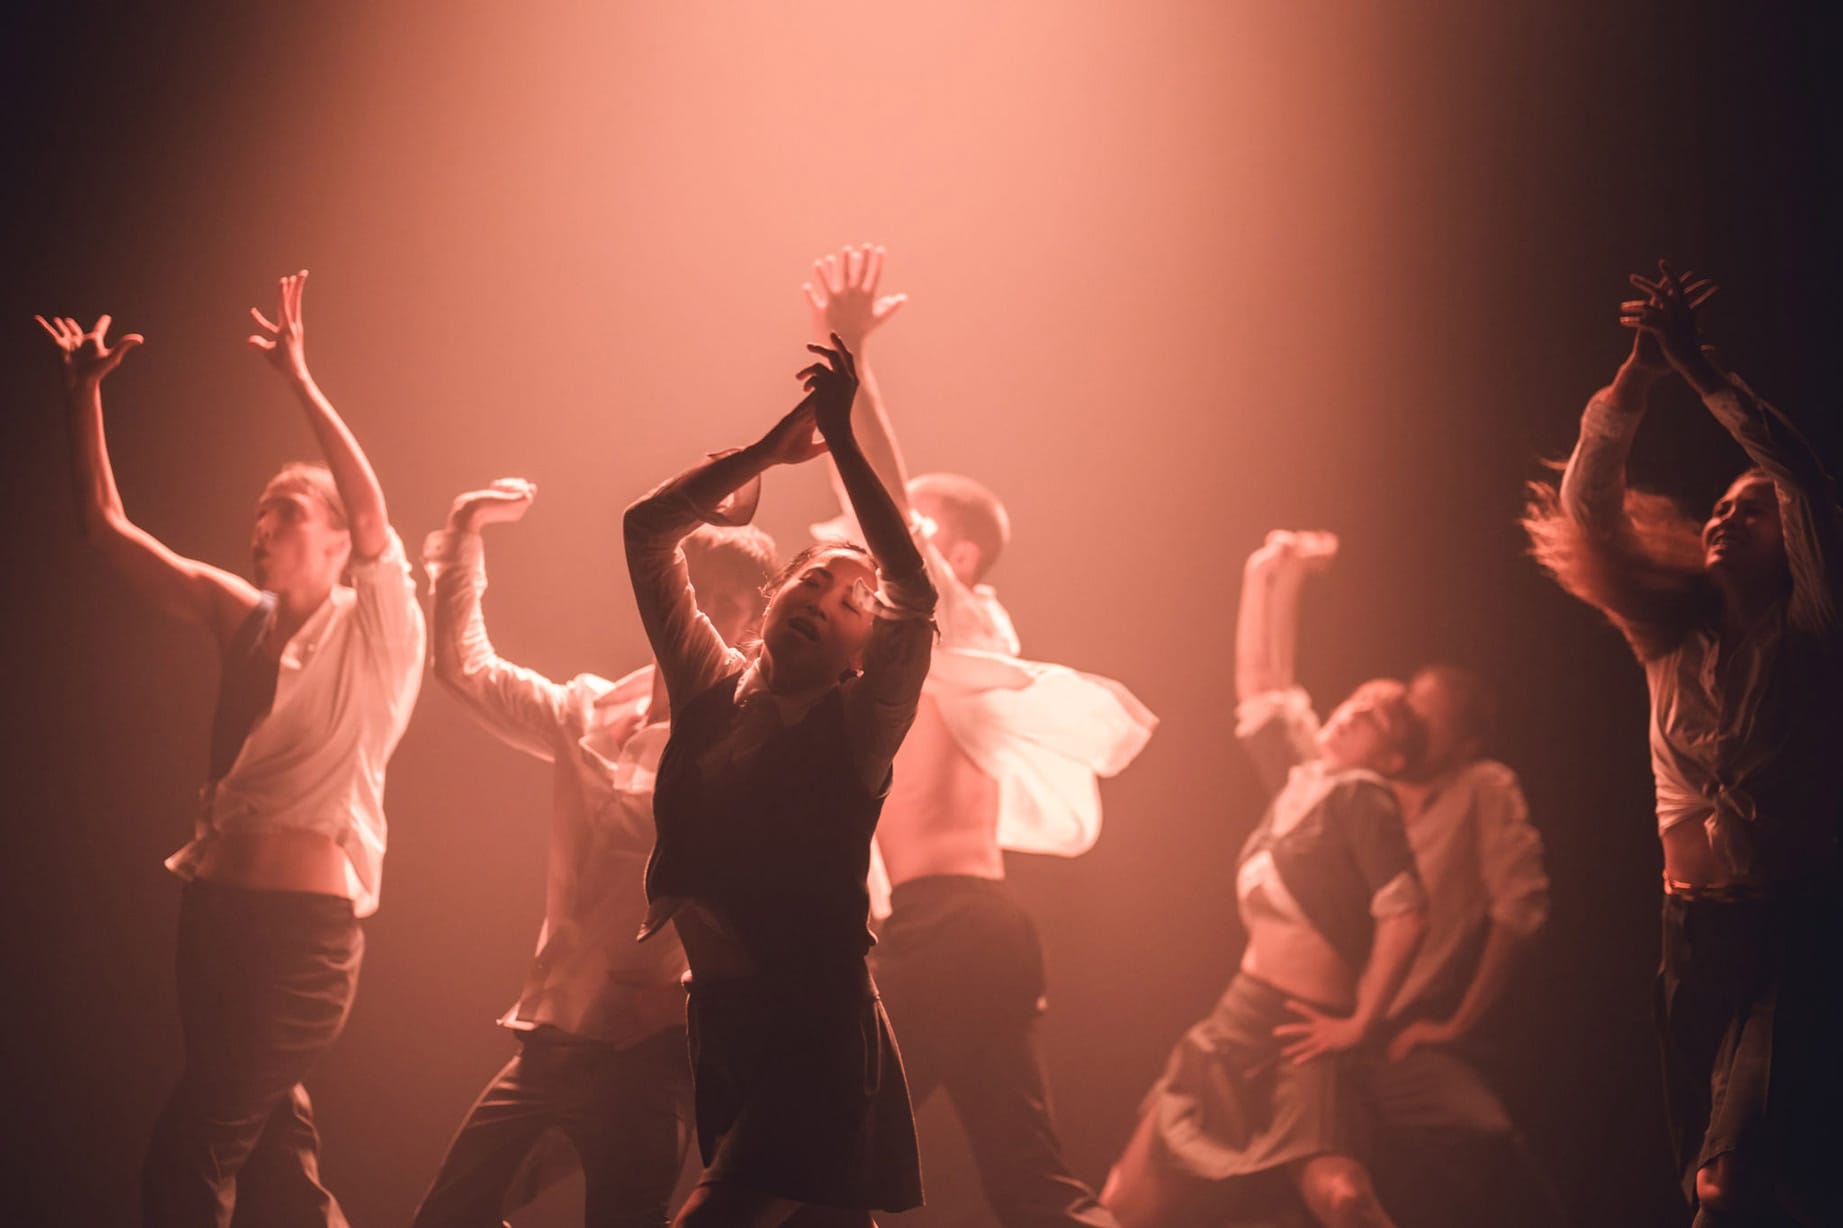 The ensemble dancers are each captured in motion, displaying different positions under a warm red light.